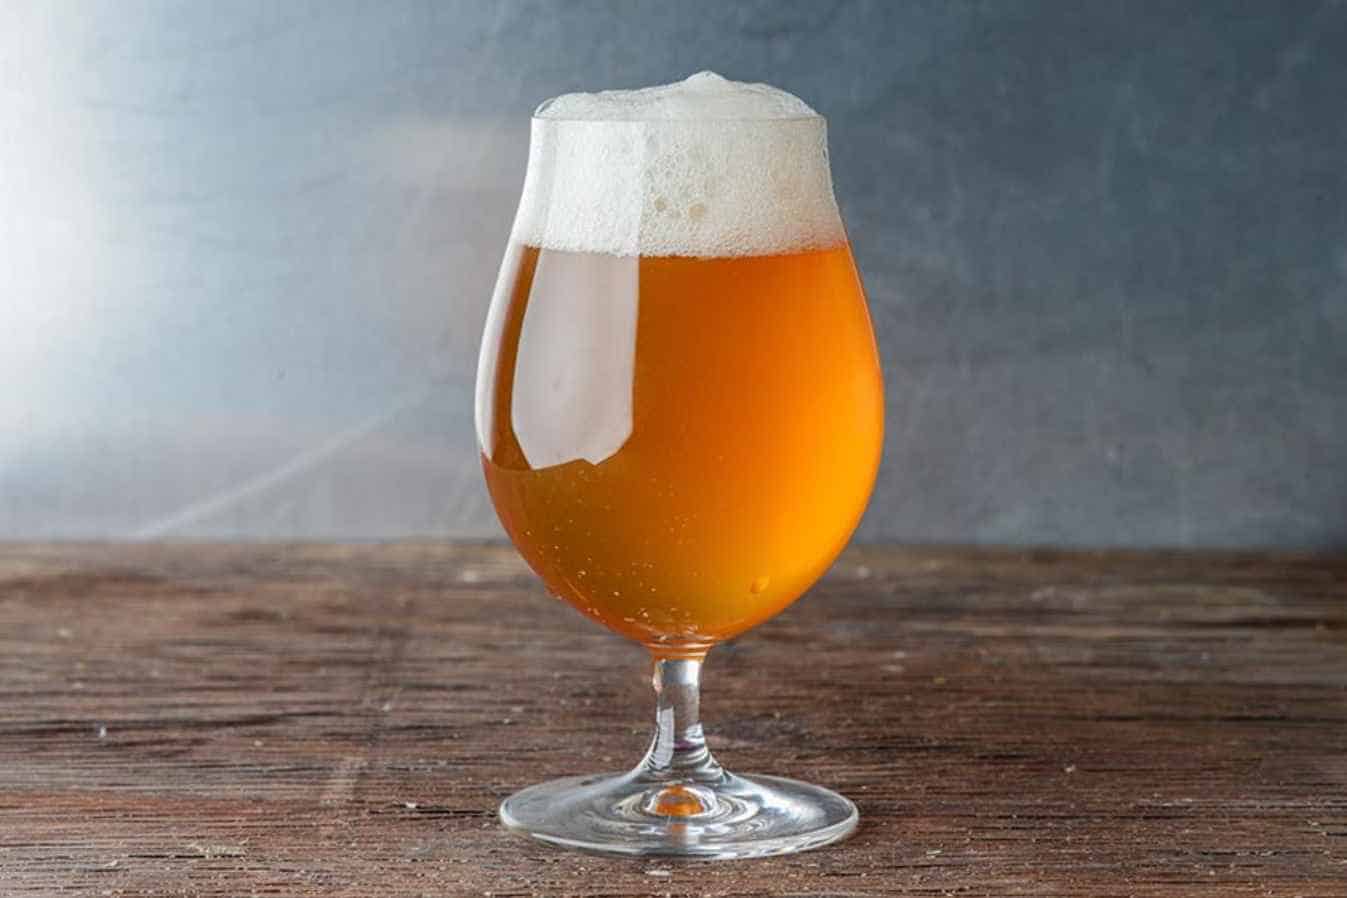 Saison Beer Guide Style, History, Flaver, Made & Serving Tips